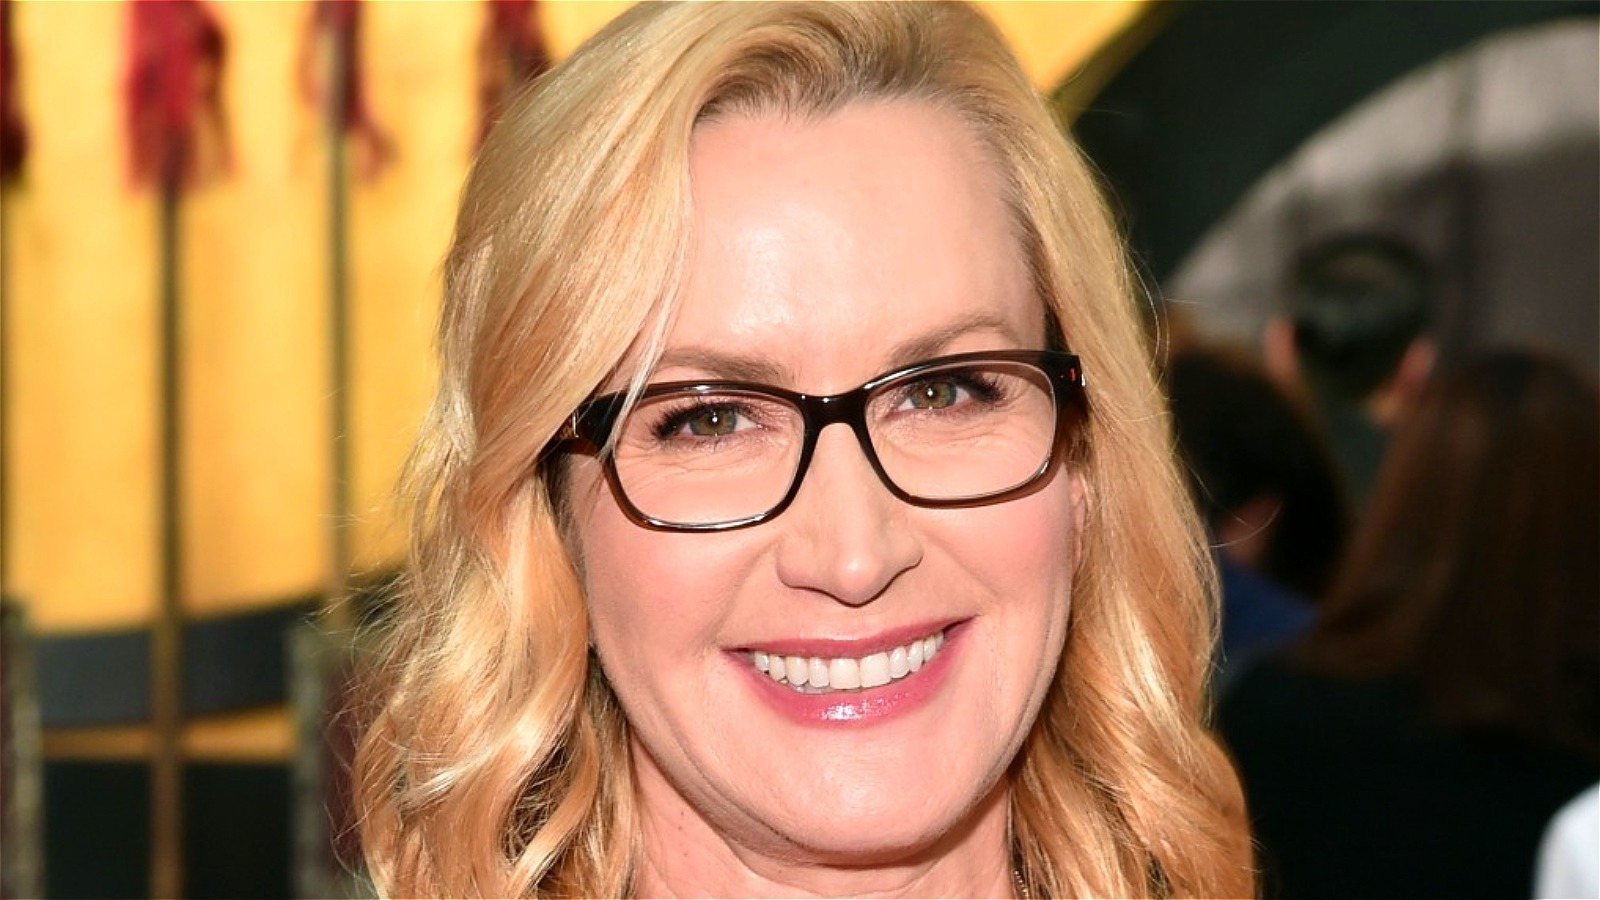 The Office Star Angela Kinsey Gets Honest About How Fans Treat Her